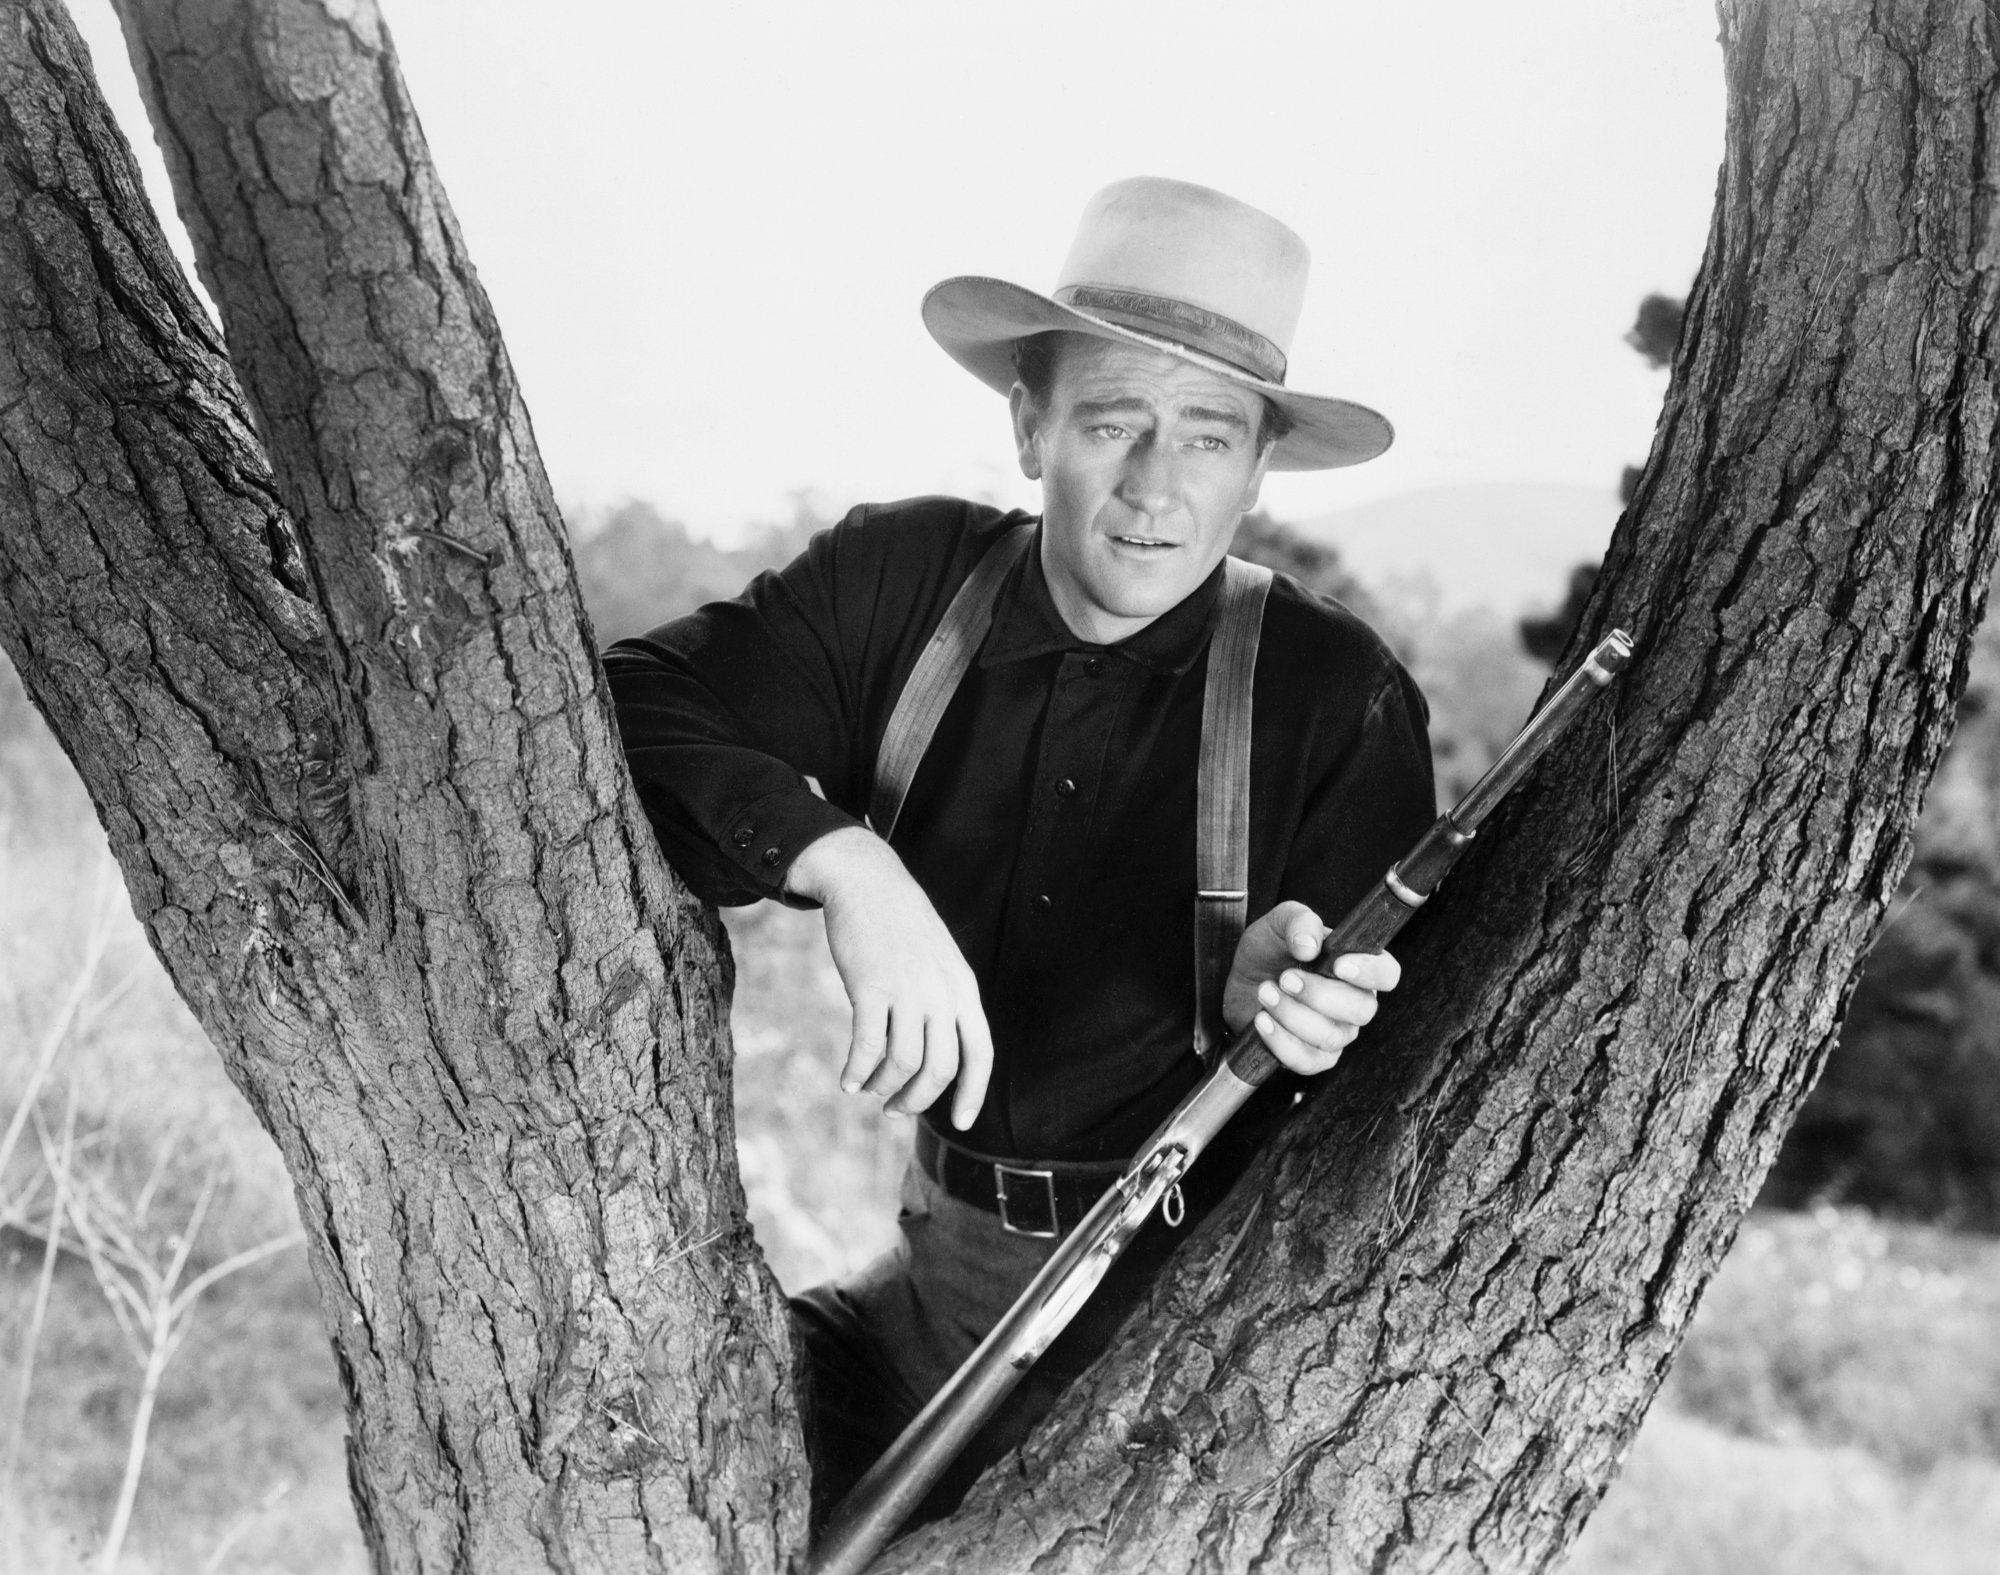 John Wayne in article about turning down Steven Spielberg role leaning on a tree with a gun